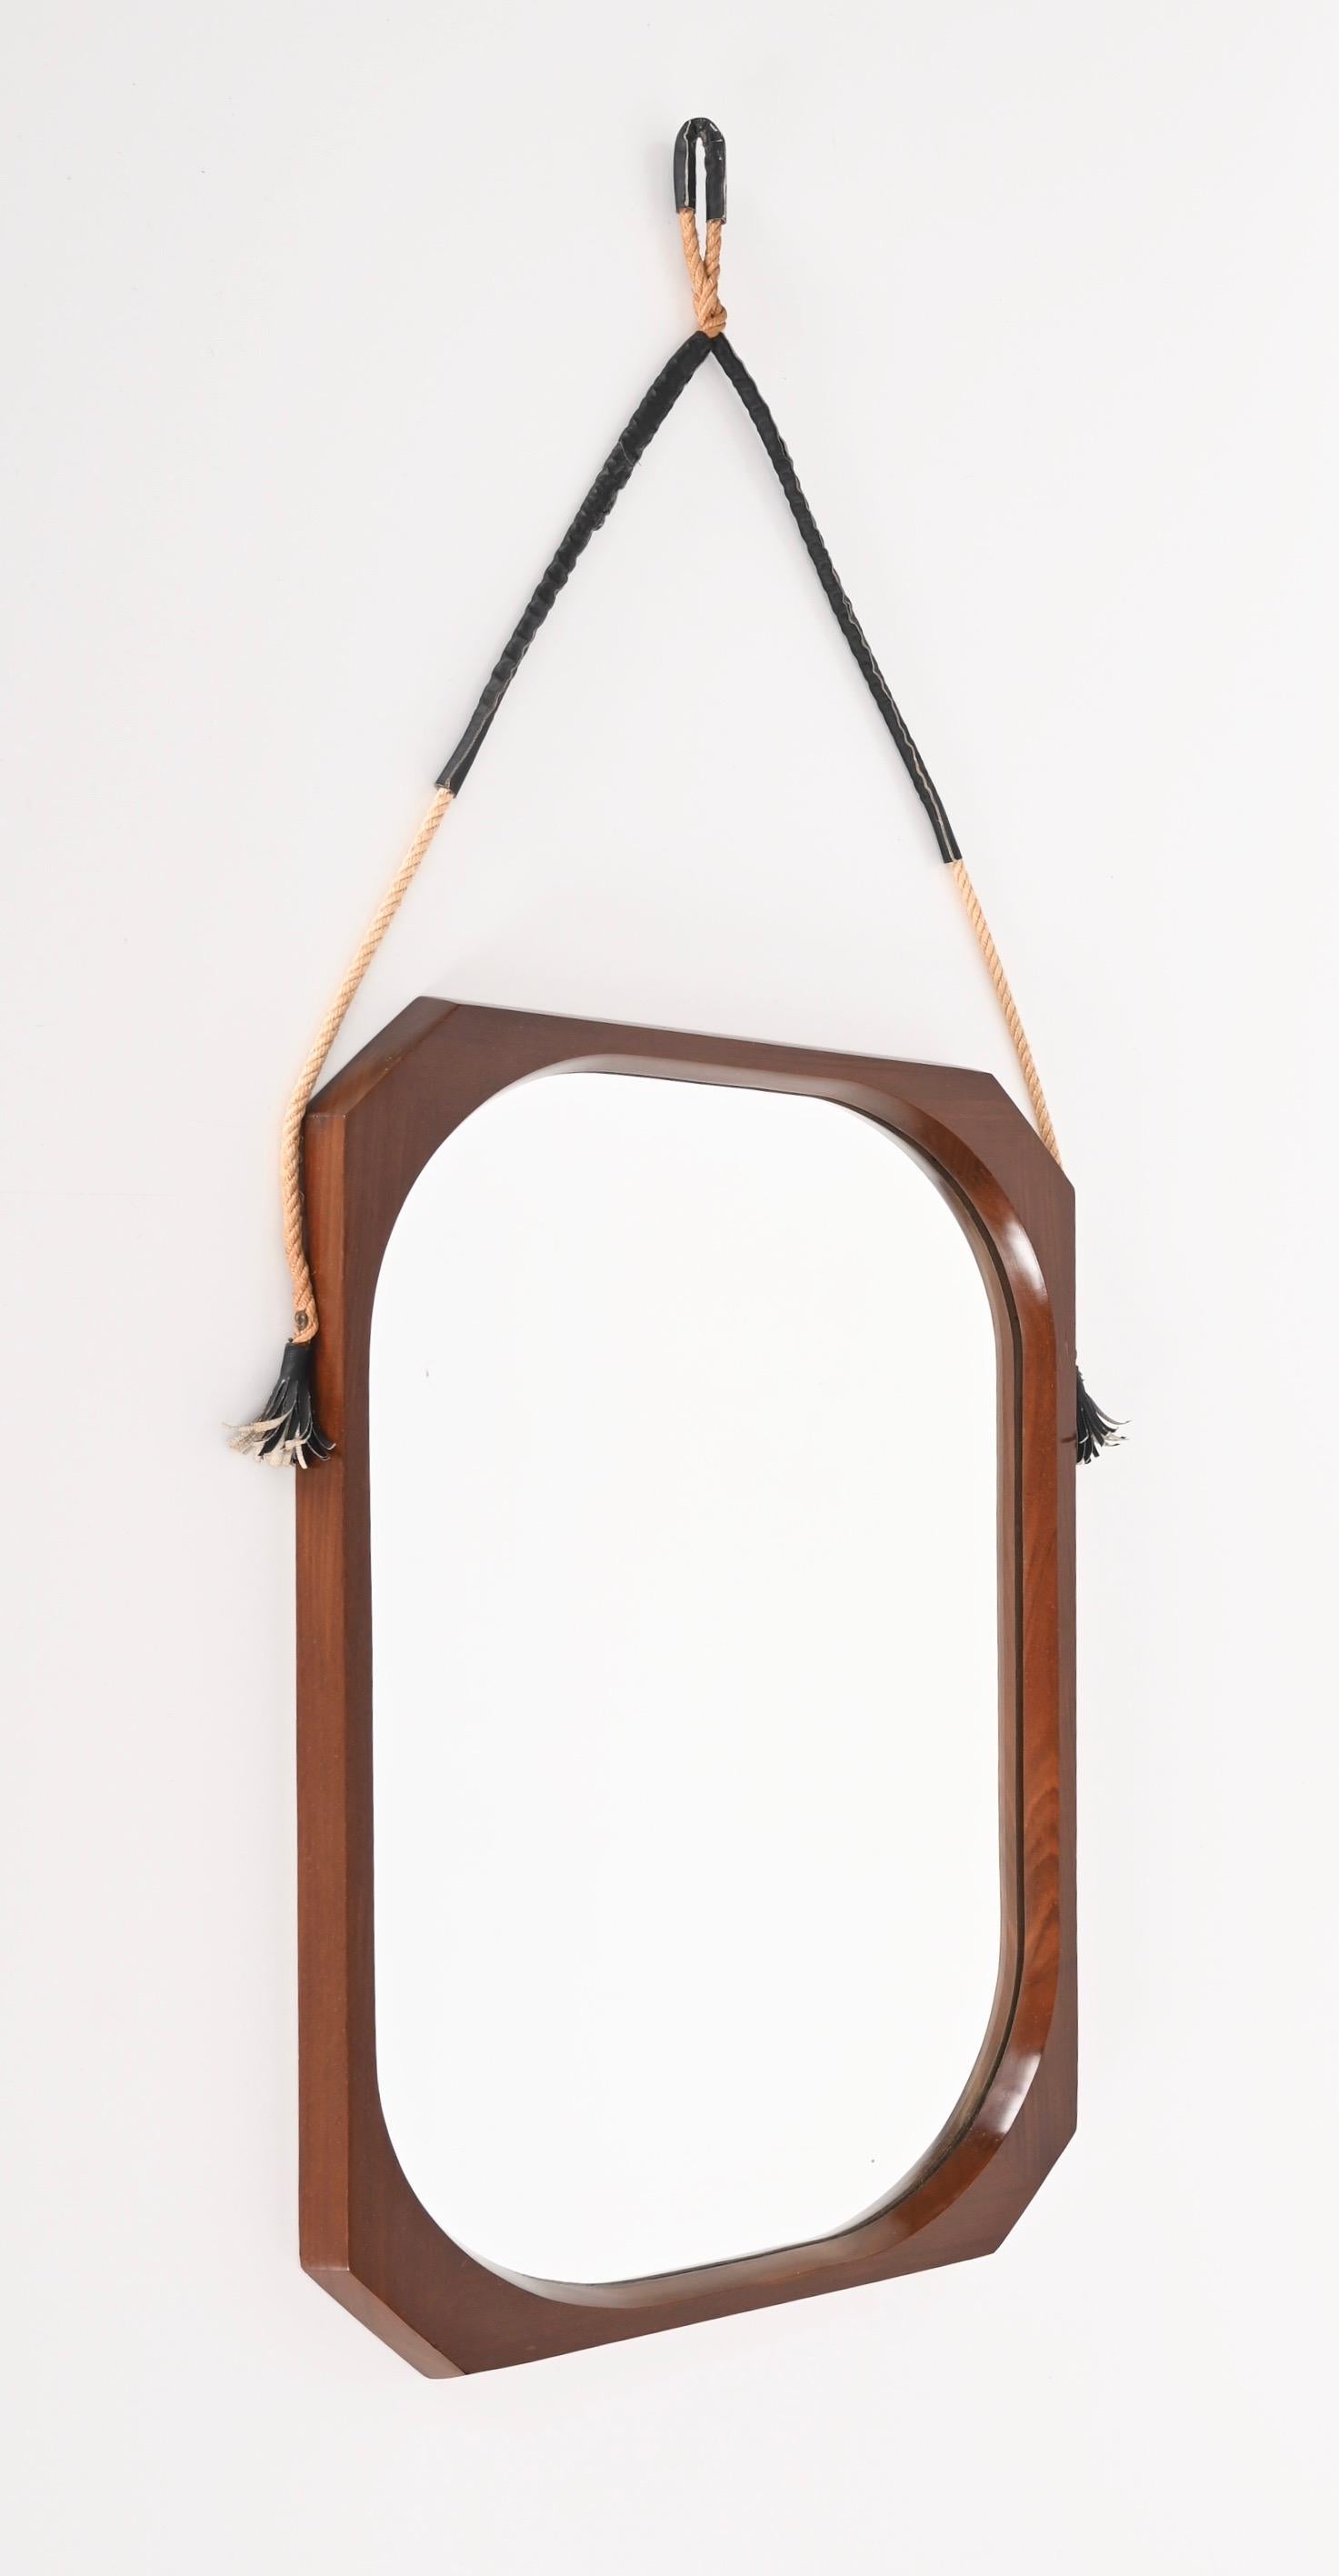 Amazing midcentury teak, rope and leather octagonal wall framed mirror. This wonderful piece was produced in Italy in the 60s by Domustil.

The mirror features a beautiful octagonal frame in teak wood with stunning wood grains, that seems to float